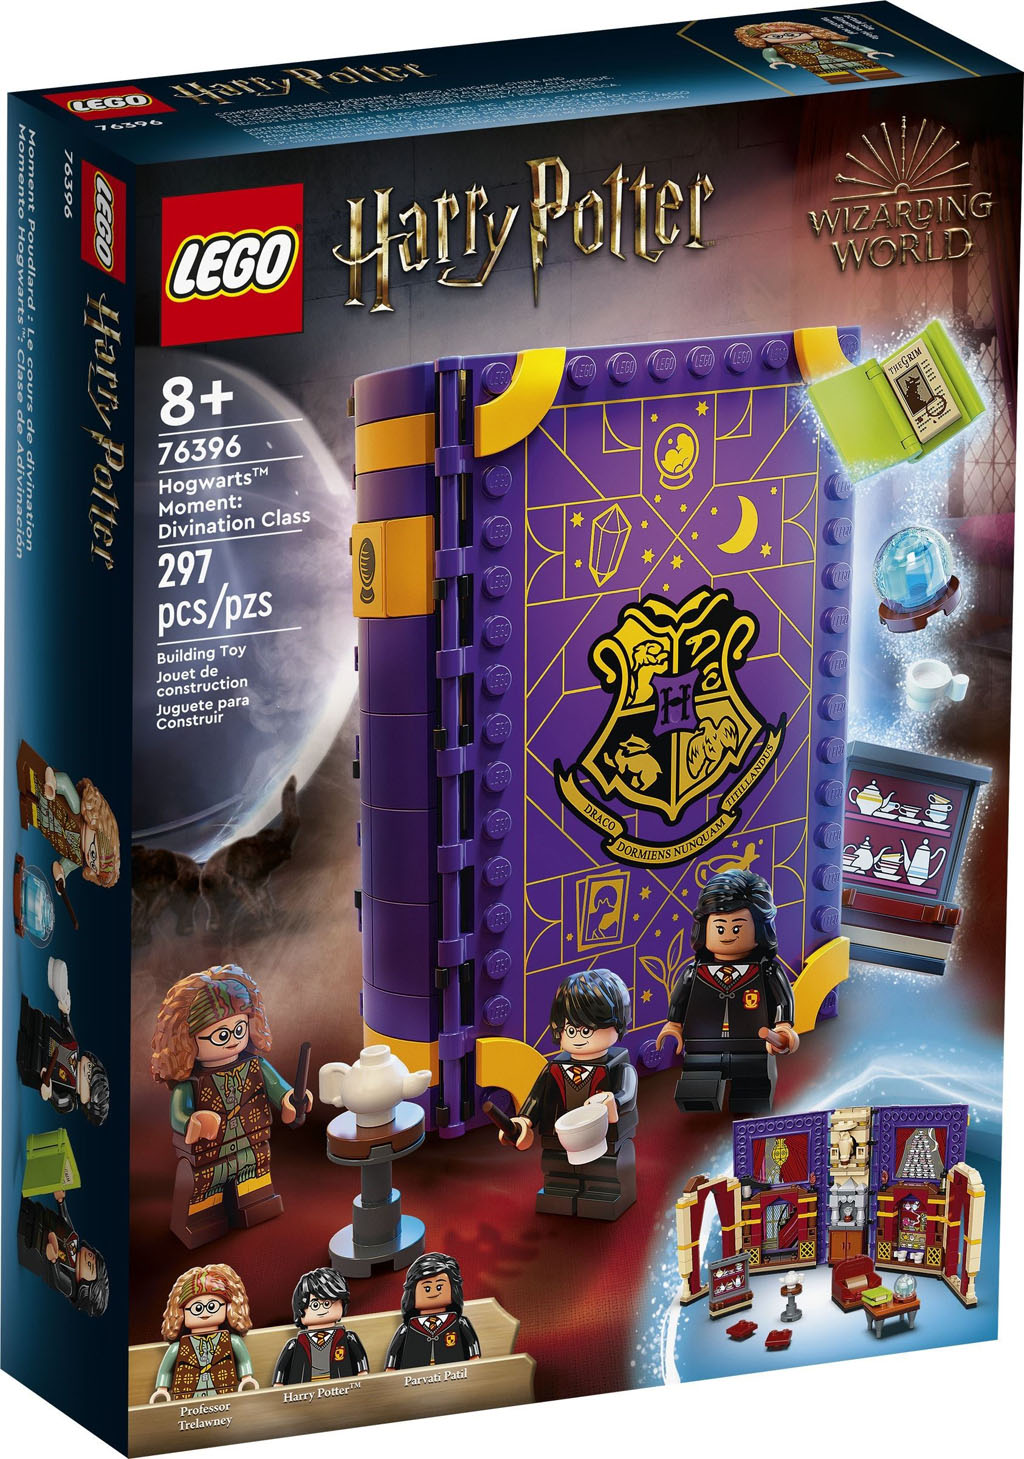 LEGO Harry Potter Official Images & Product Details The Brick Fan